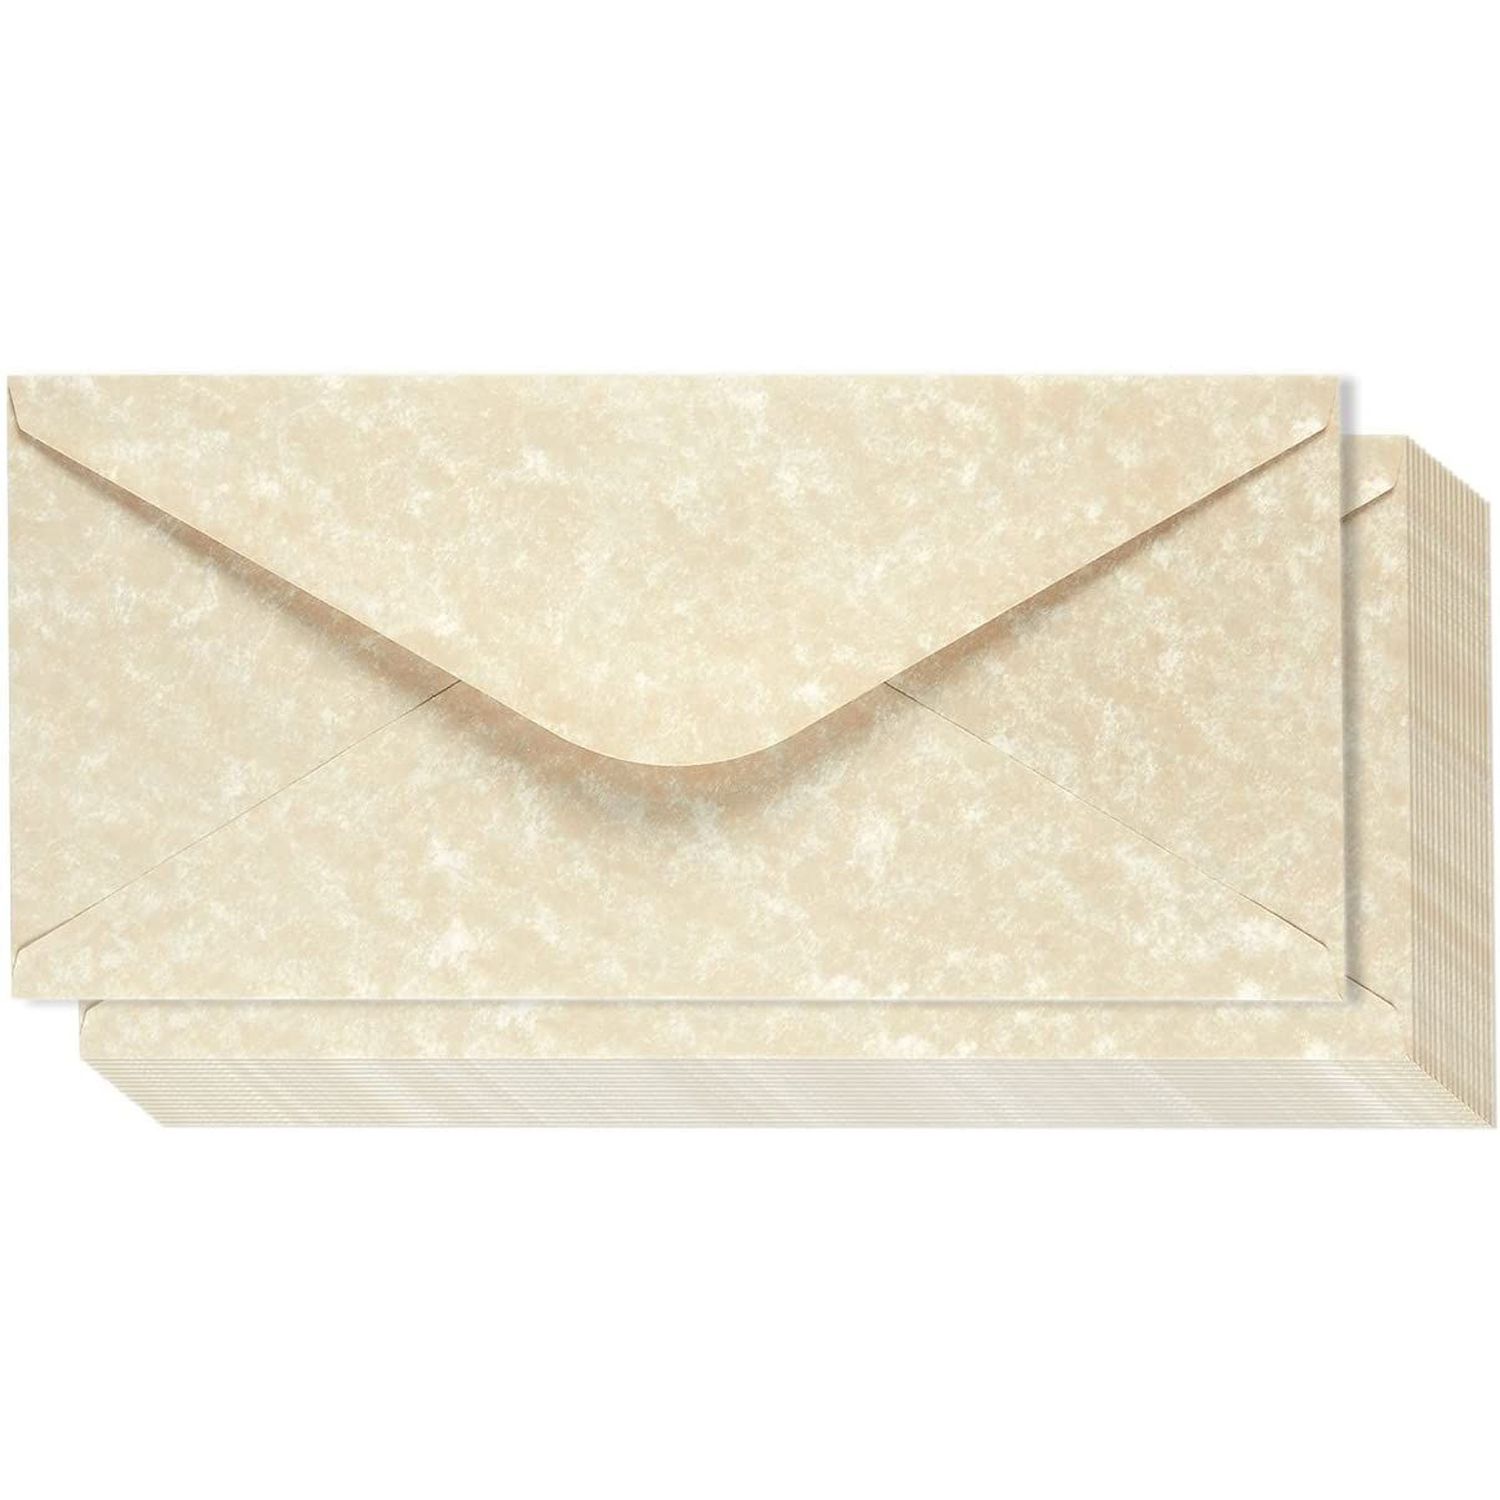 48-Pack Old Fashioned Vintage Envelopes for Writing Letters with 6